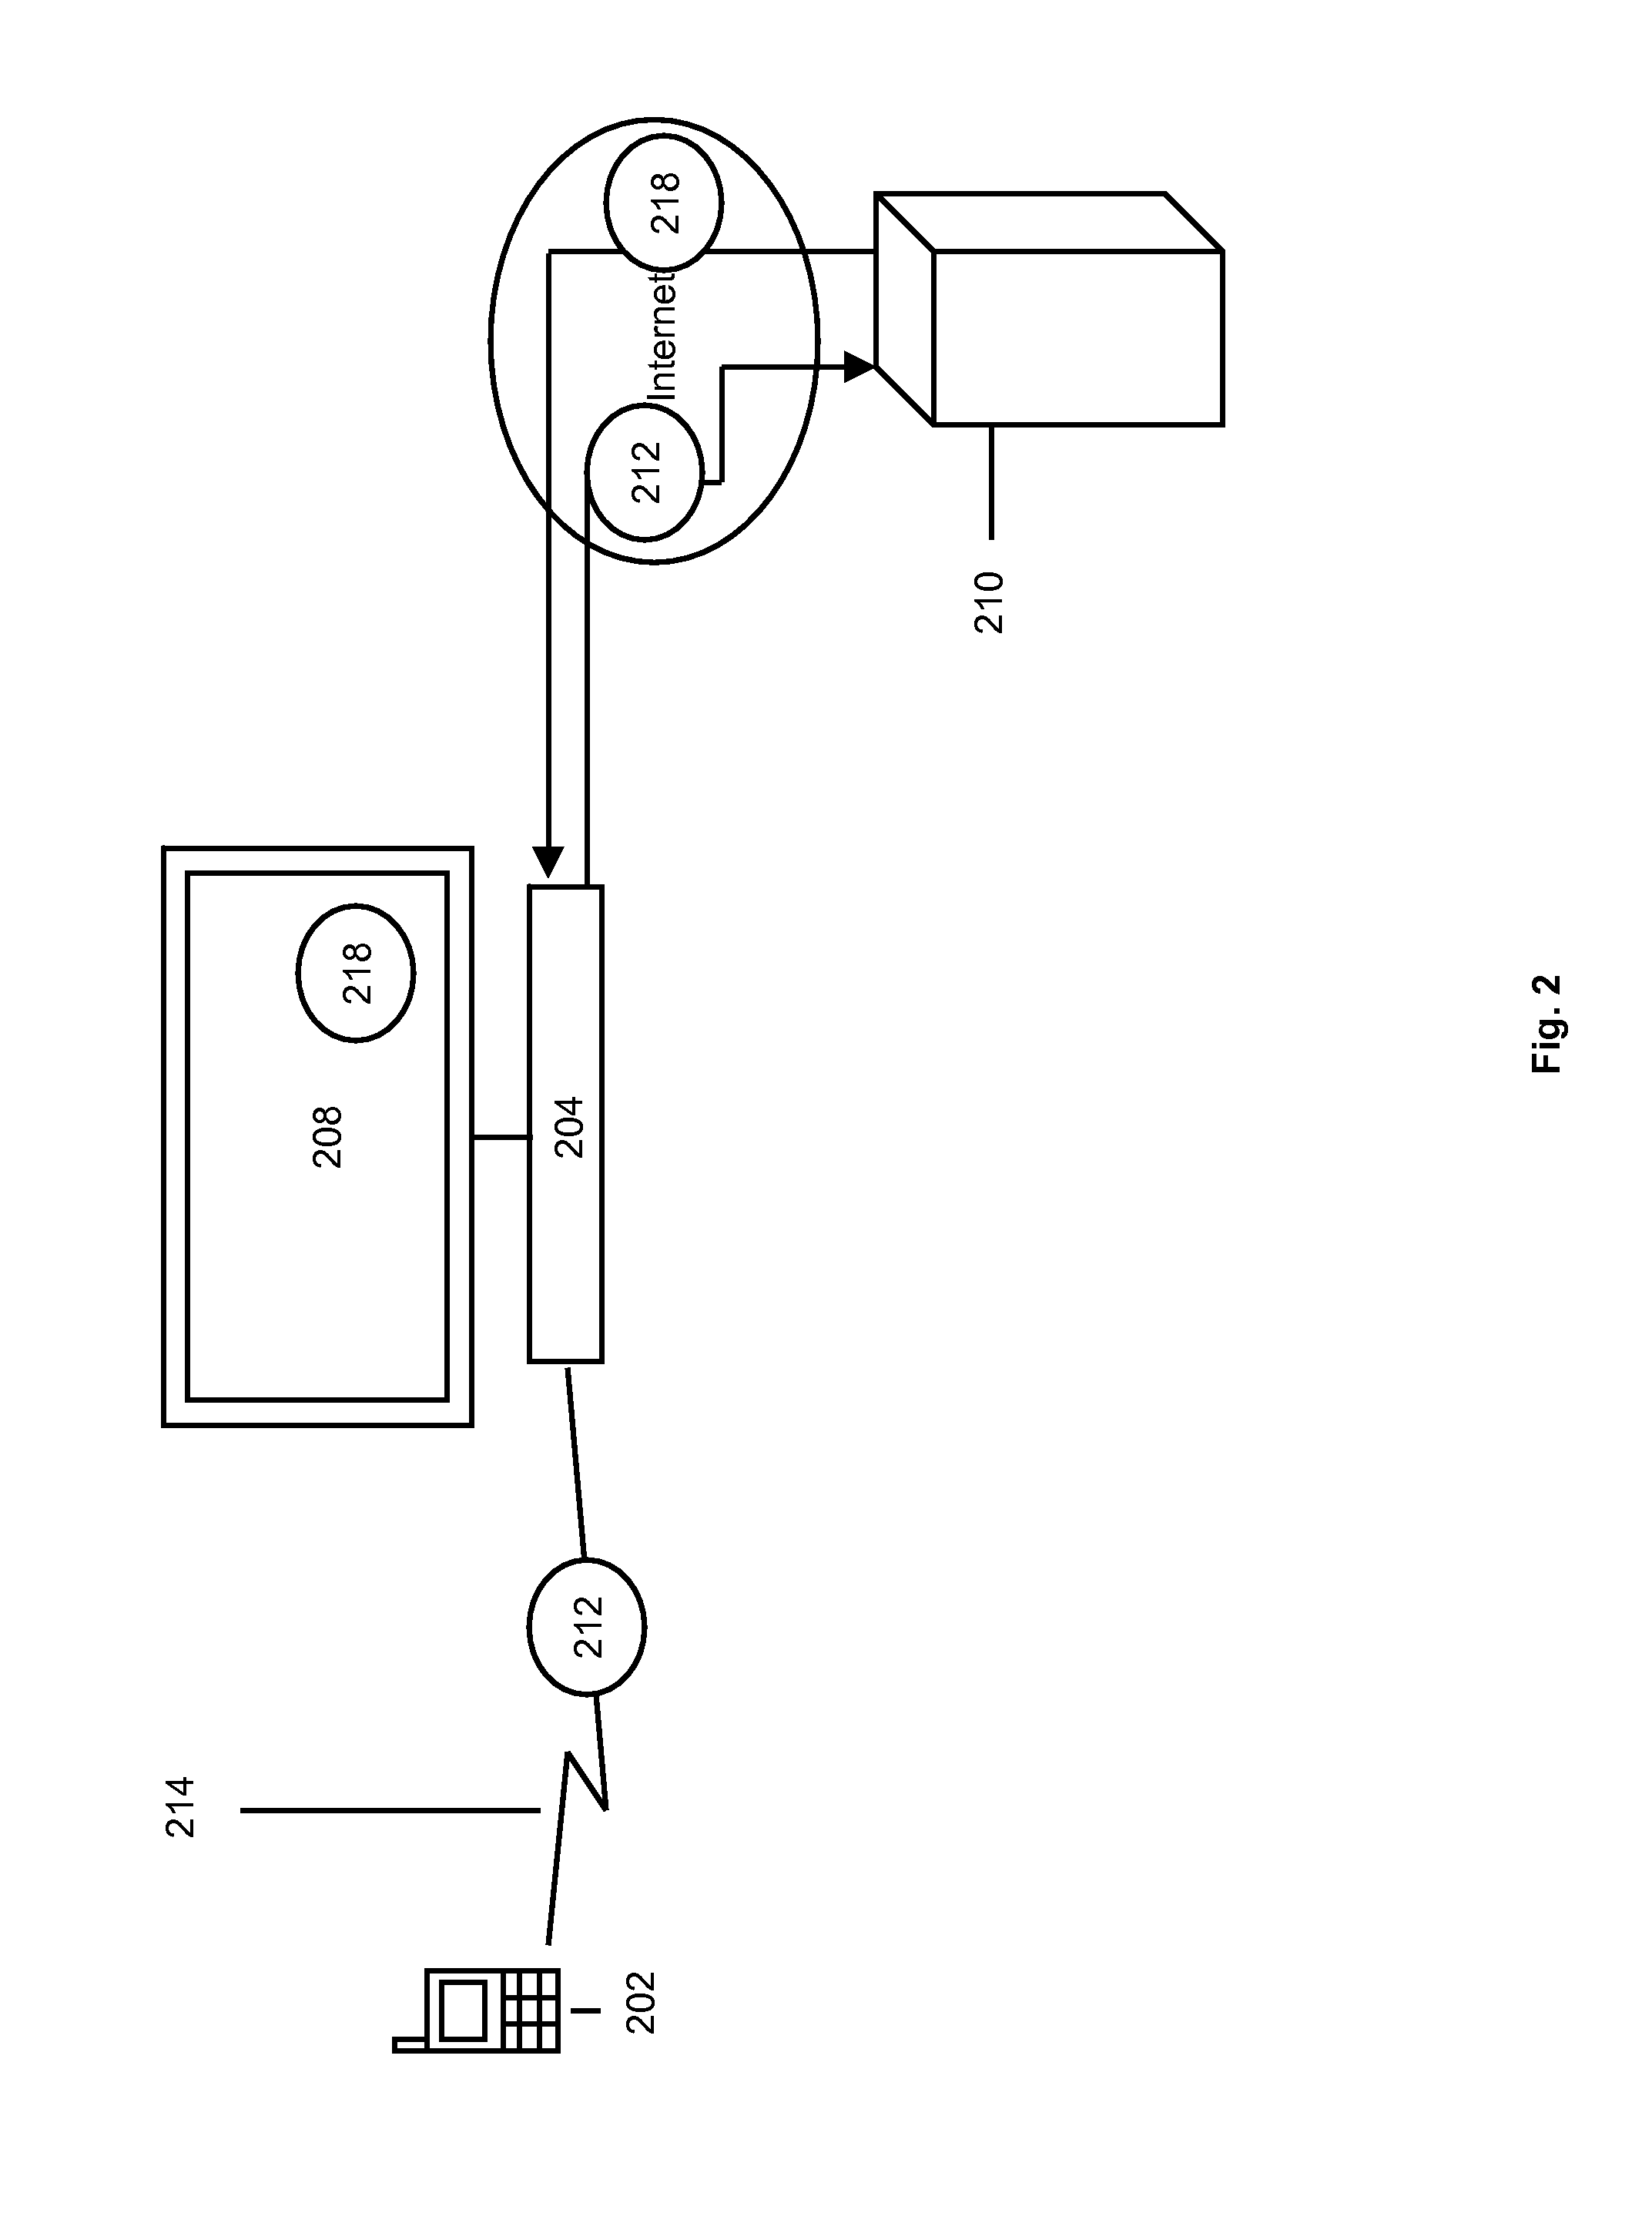 Methods and systems for securing content played on mobile devices